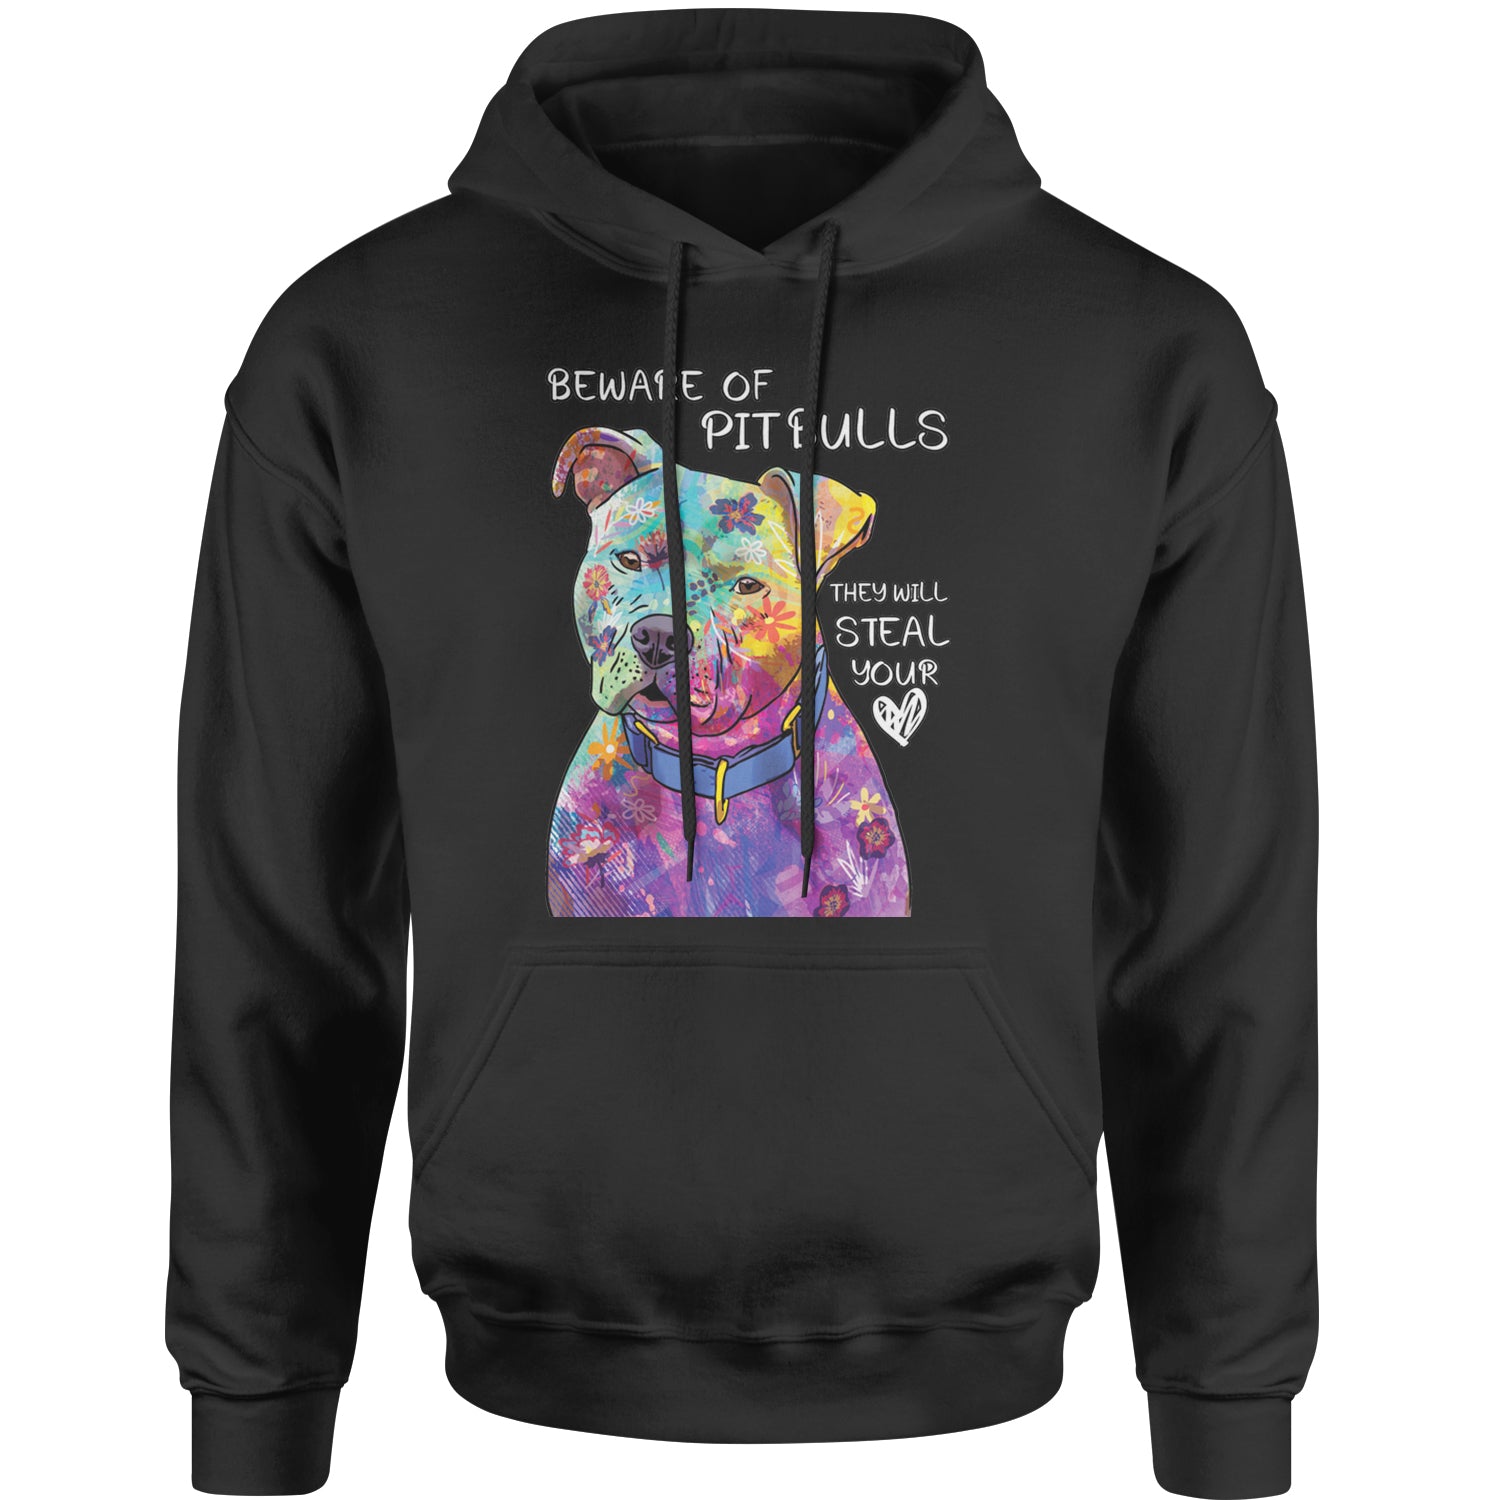 Beware Of Pit Bulls, They Will Steal Your Heart  Adult Hoodie Sweatshirt